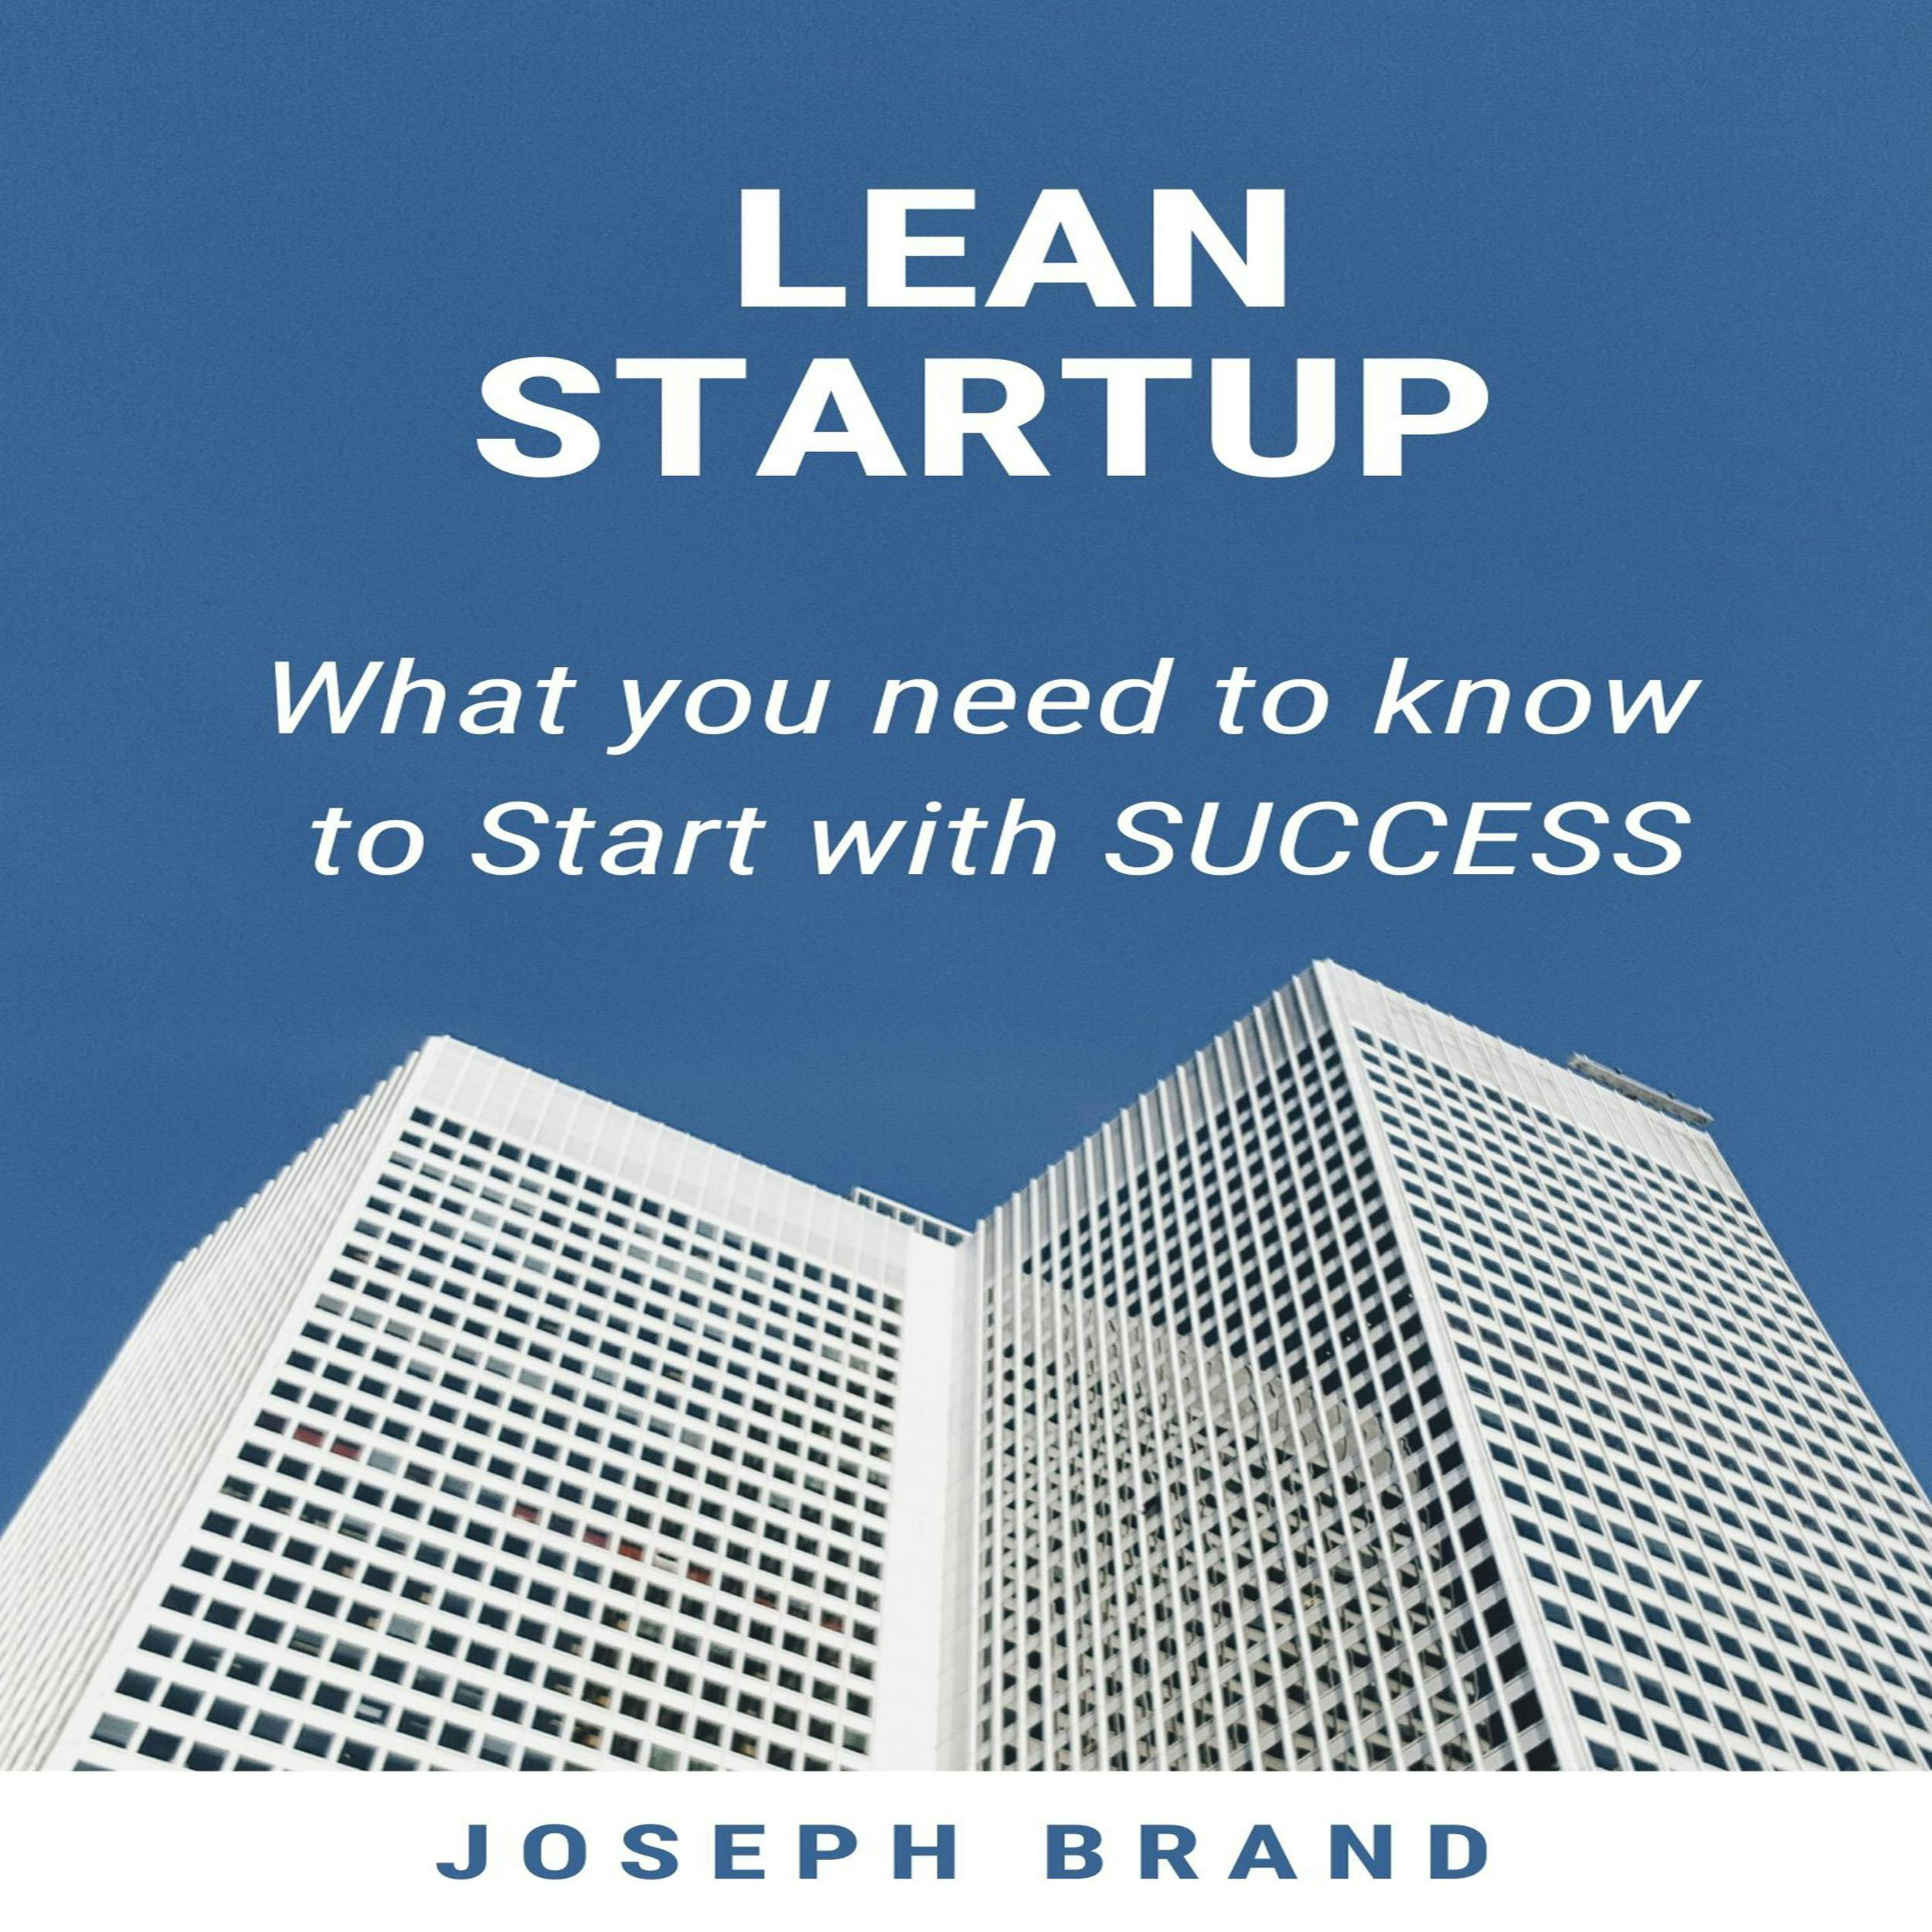 LEAN STARTUP: What you Need to Know to Start with Success - undefined